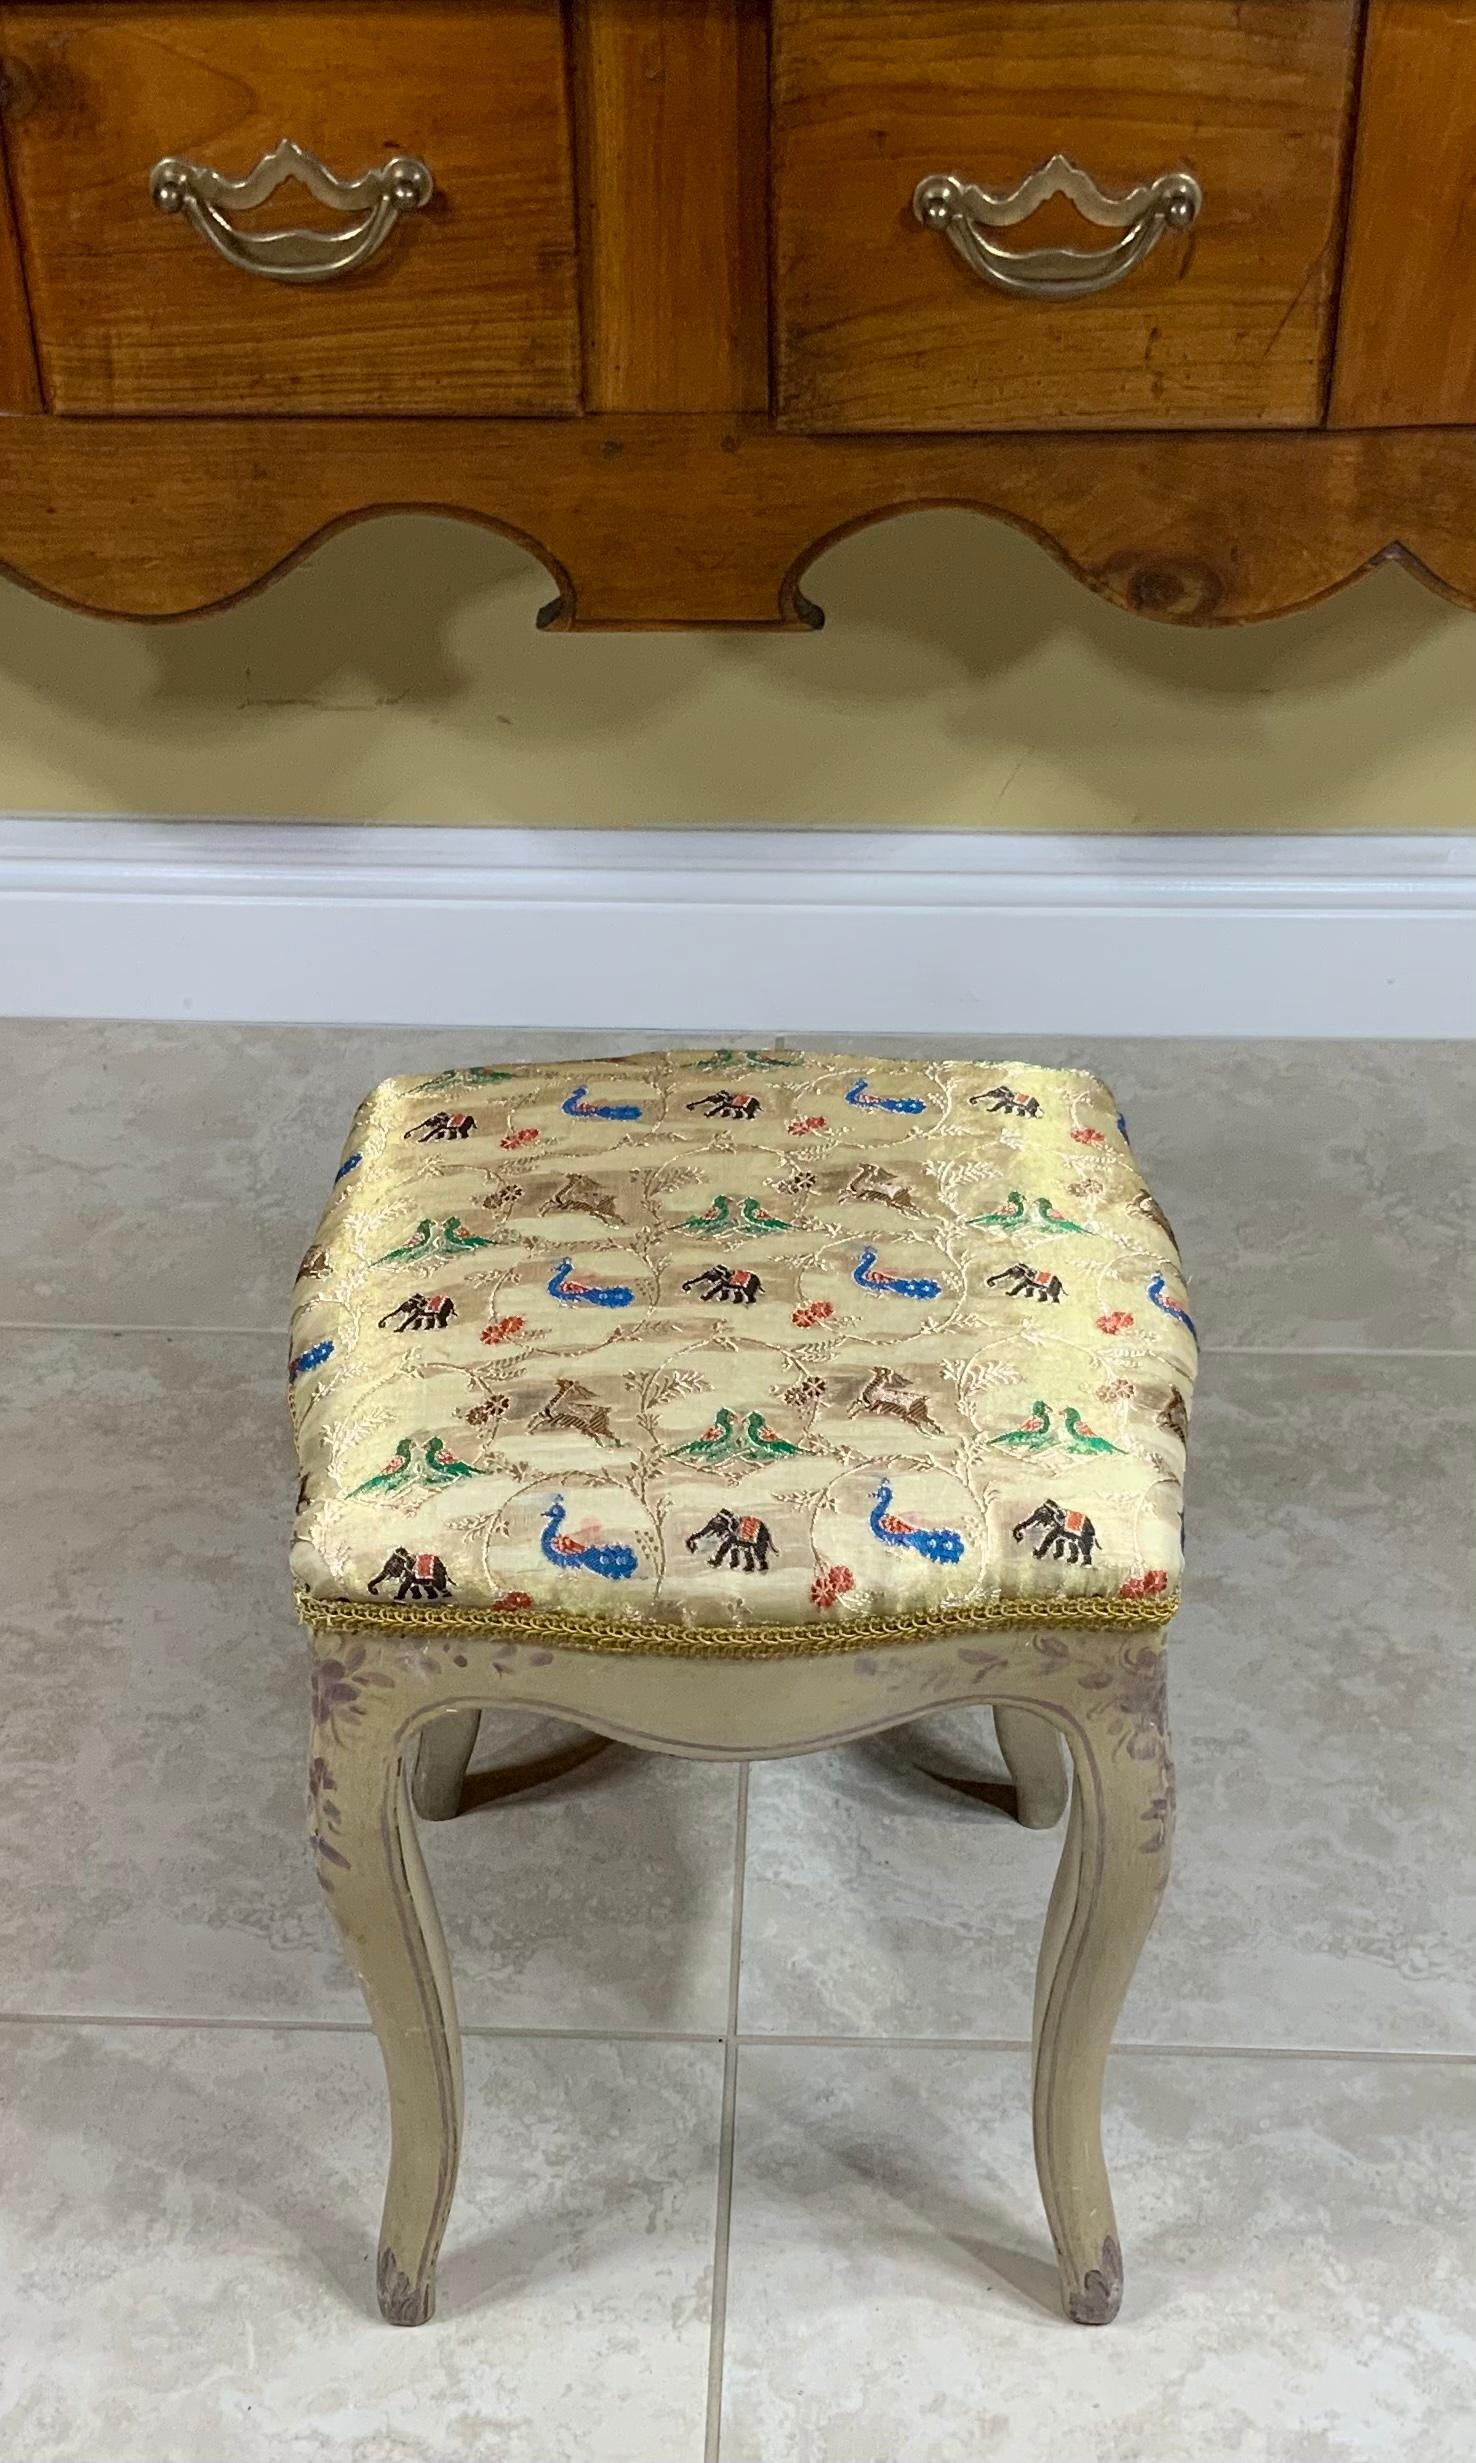 20th Century Funky Vintage Painted Wood Stool For Sale